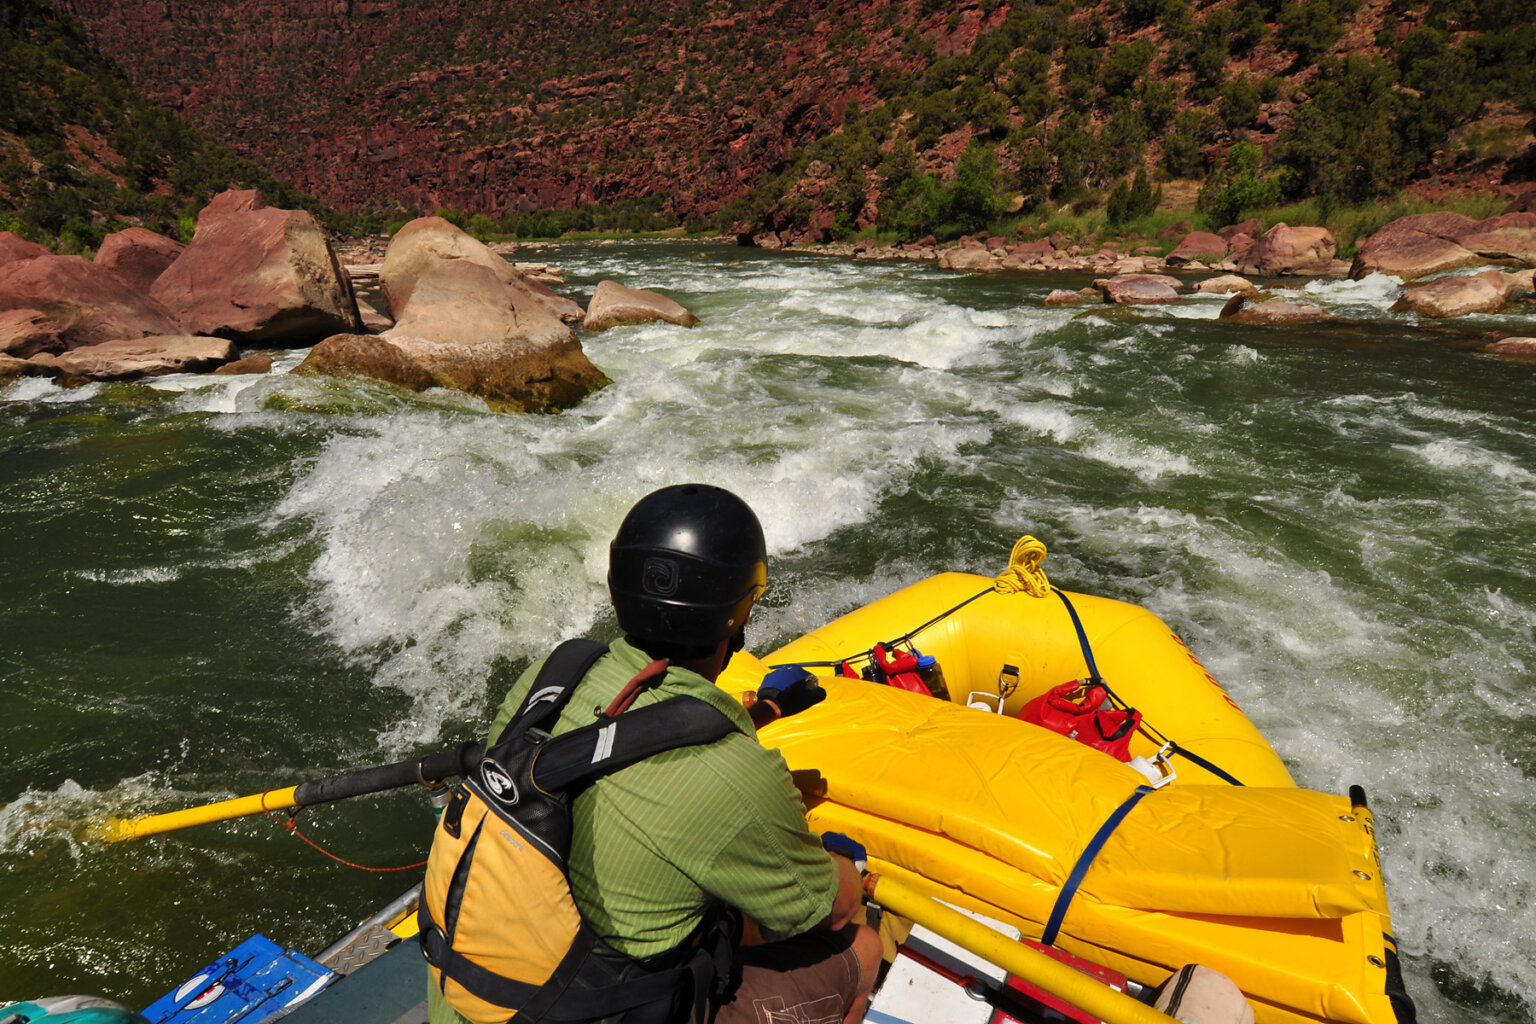 A guide rows a yellow raft through white water on the upper Green River.